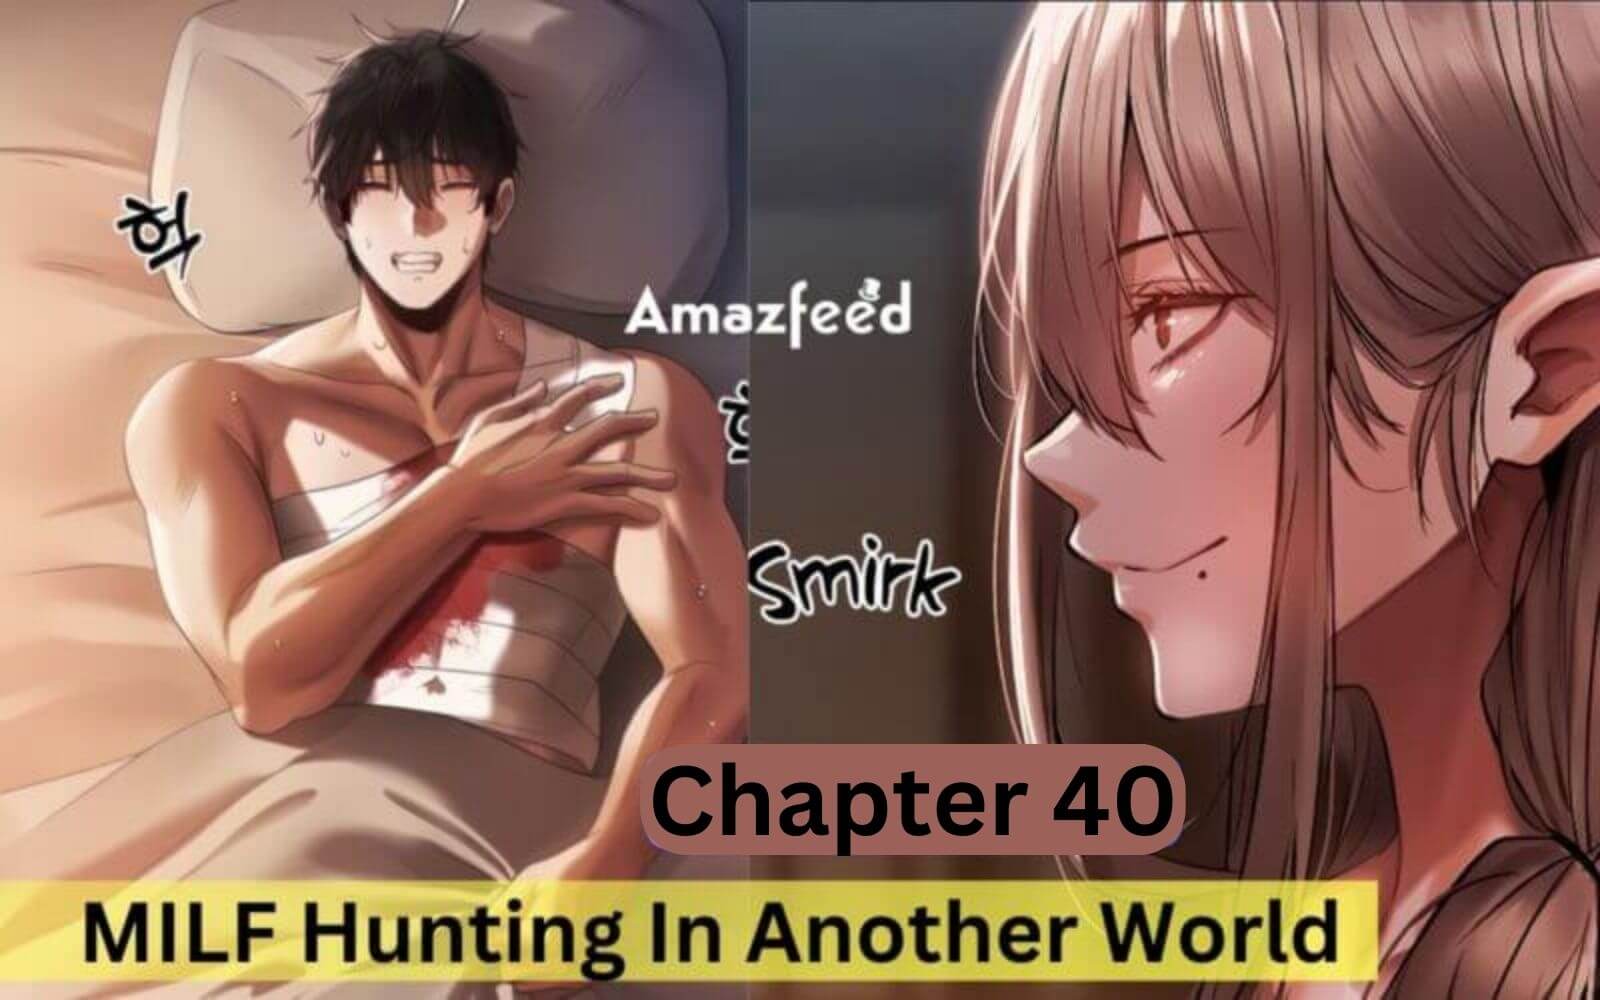 MILF Hunting In Another World Chapter 40 Reddit Spoiler